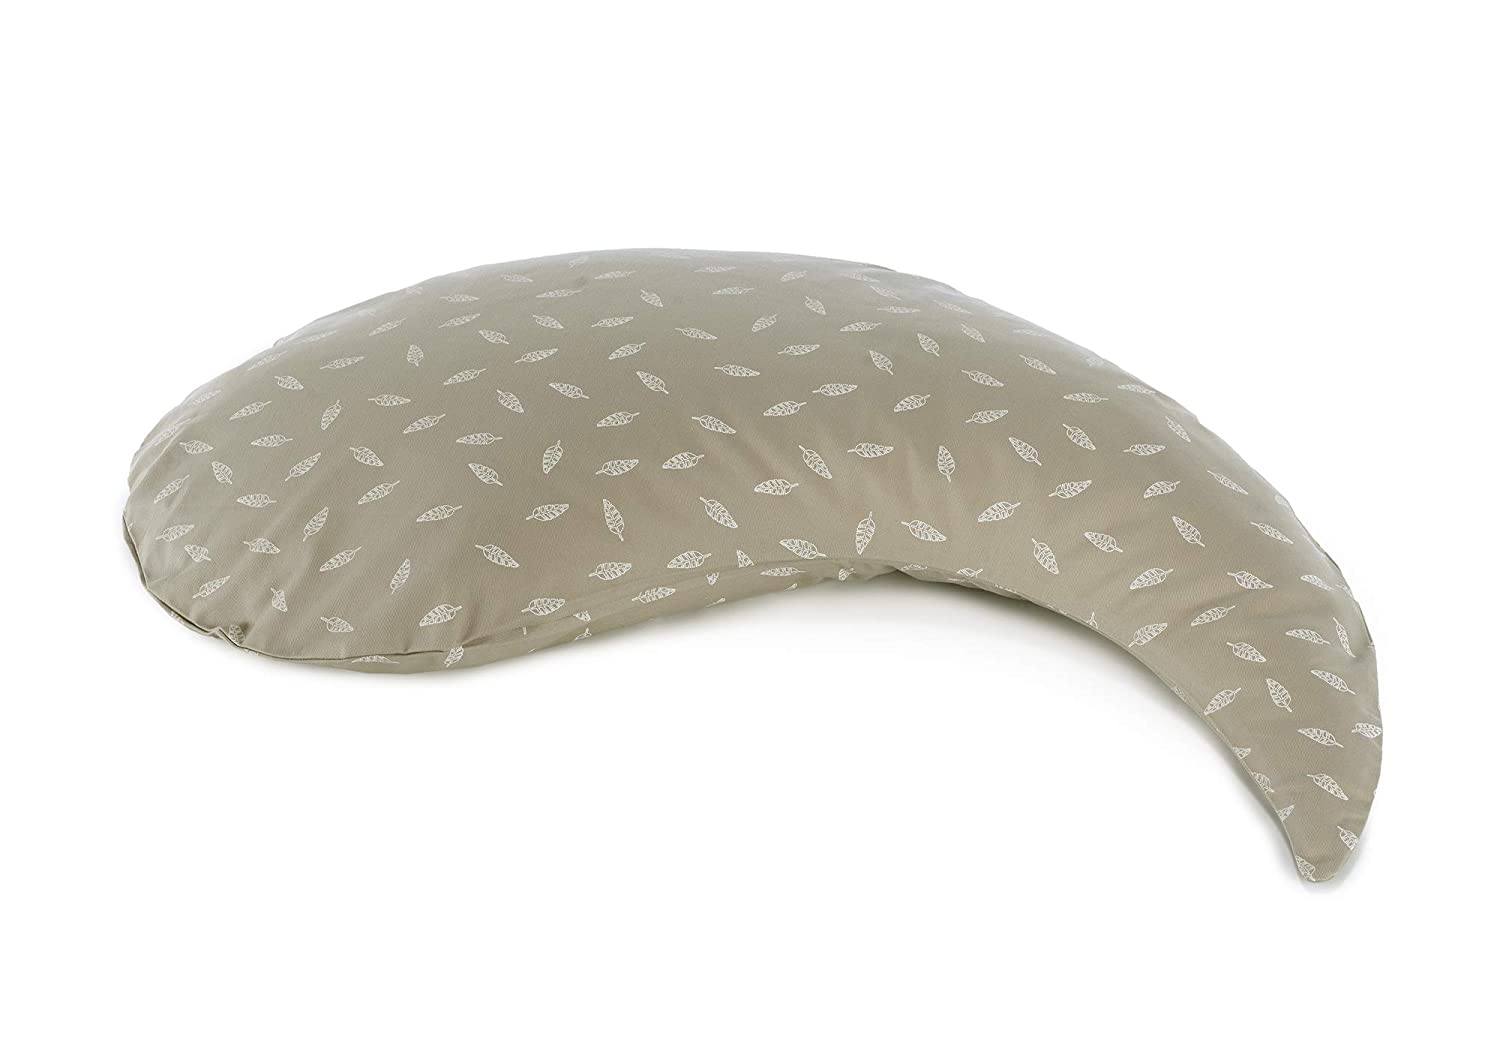 The Theraline Yinnie nursing pillow, filled with sand-like original micro-beads, including outer cover.